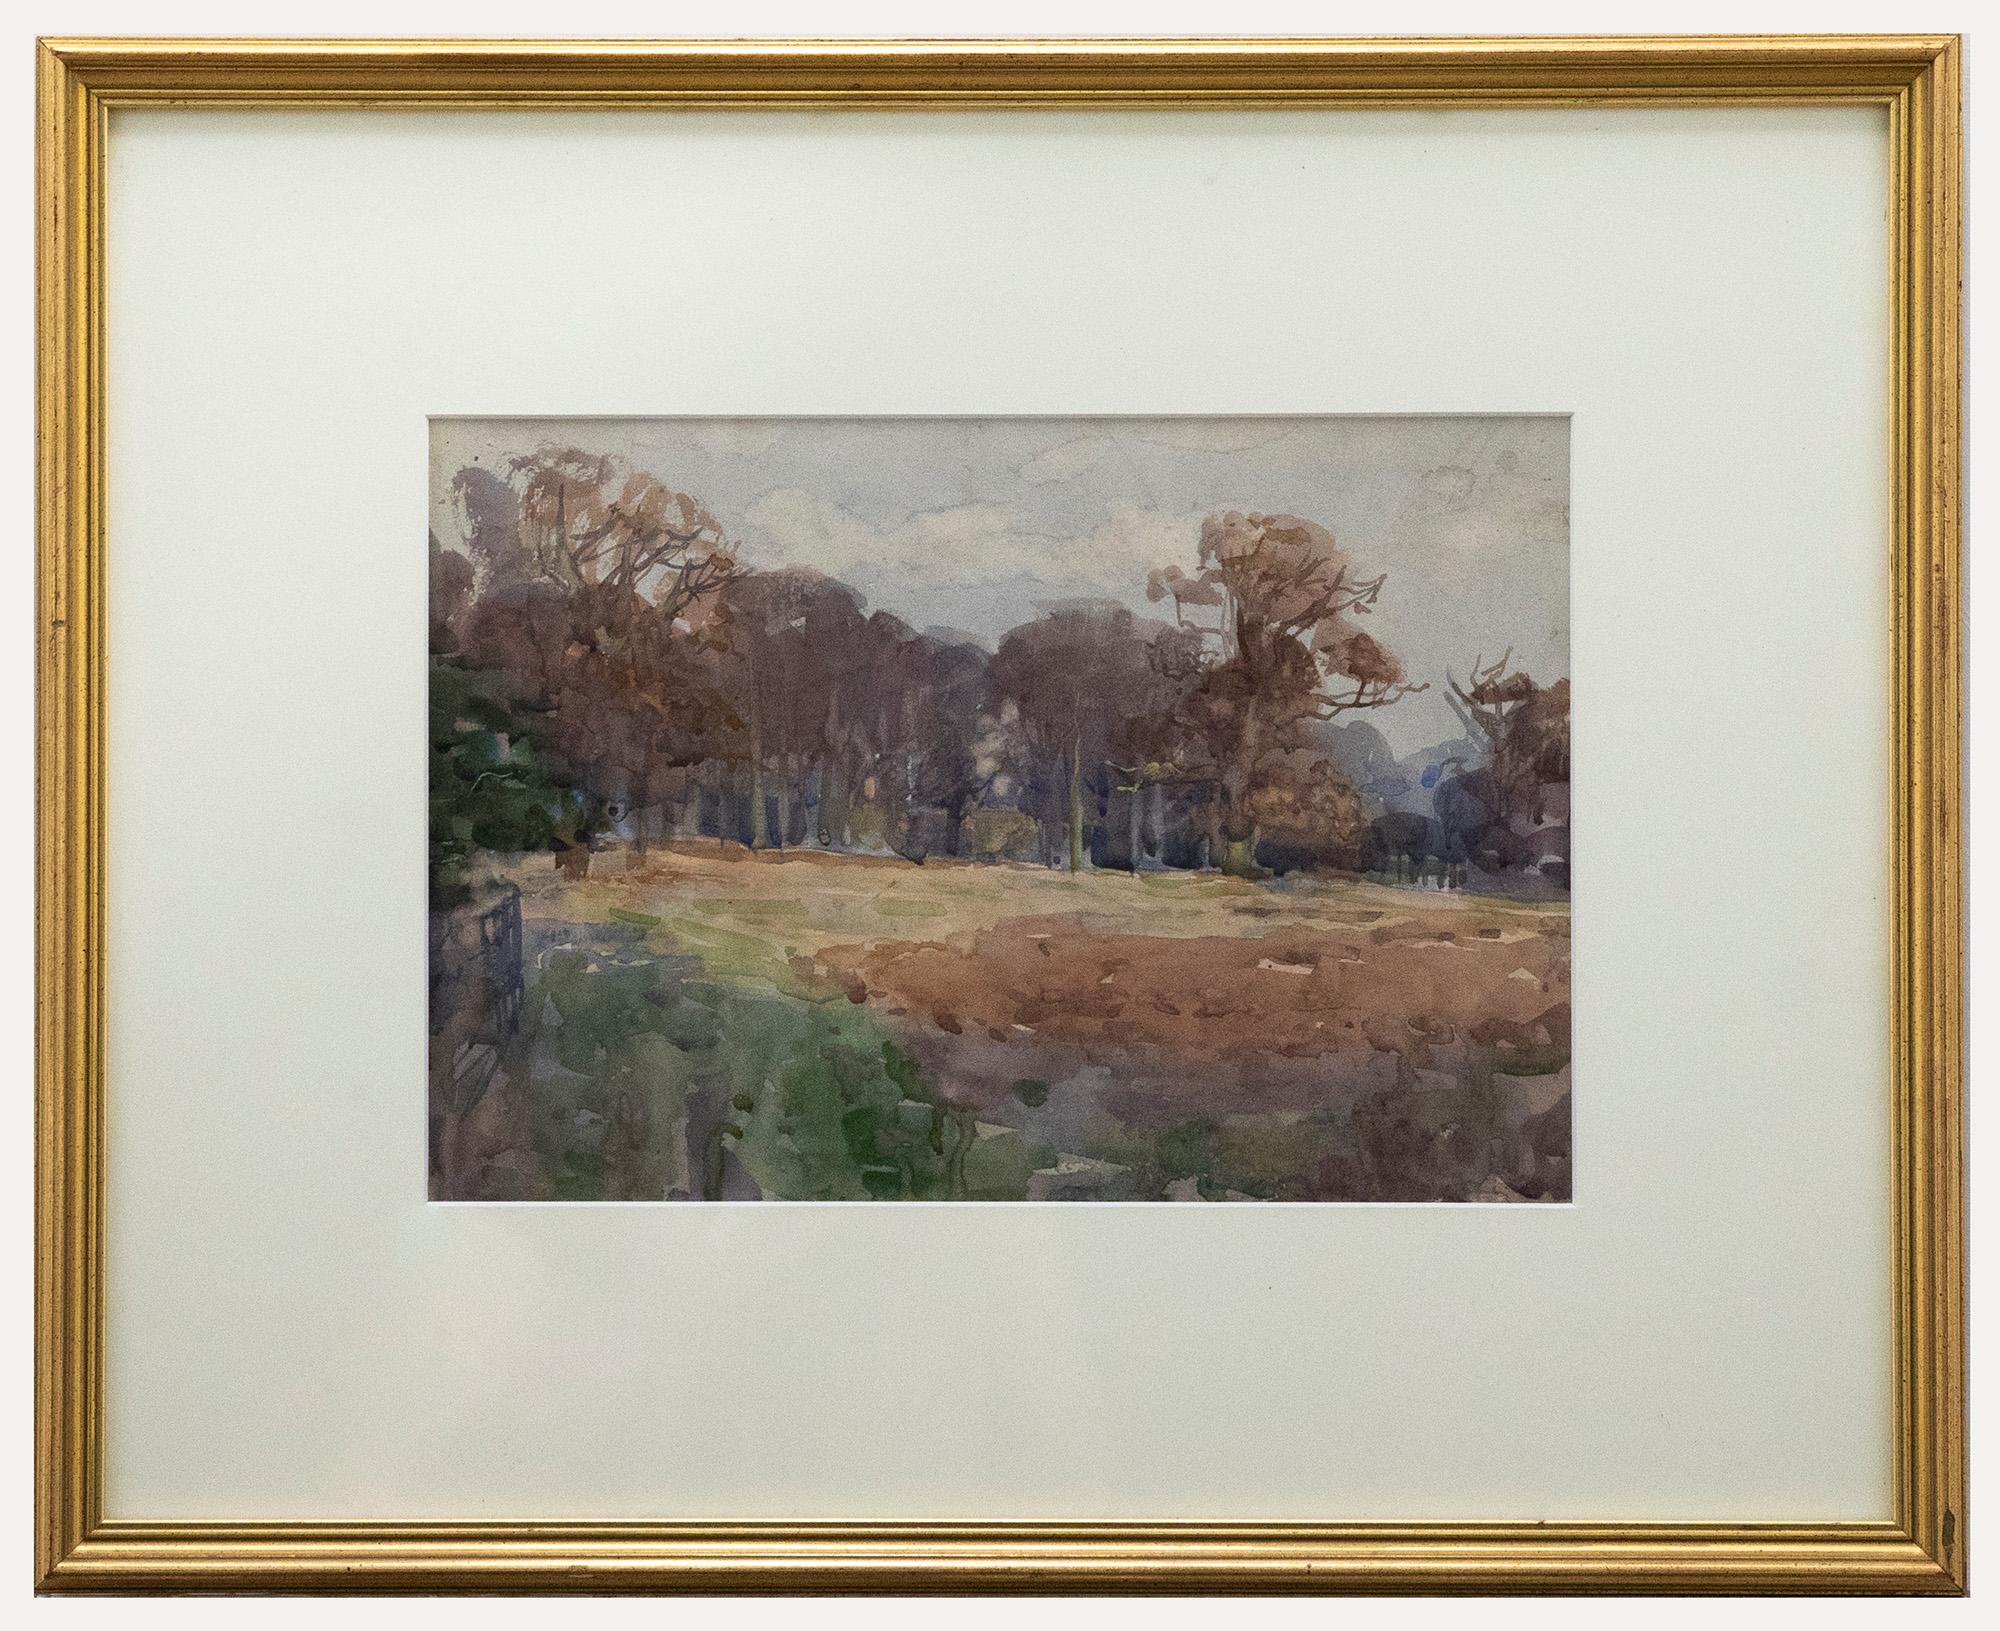 This early 20th century watercolour, attributed to Henry Charles Brewer RI (1866-1950), depicts a large beach wood met by cultivated fields. The watercolour has been elegantly mounted in a gilt-effect frame. On watercolour paper. On paper. 